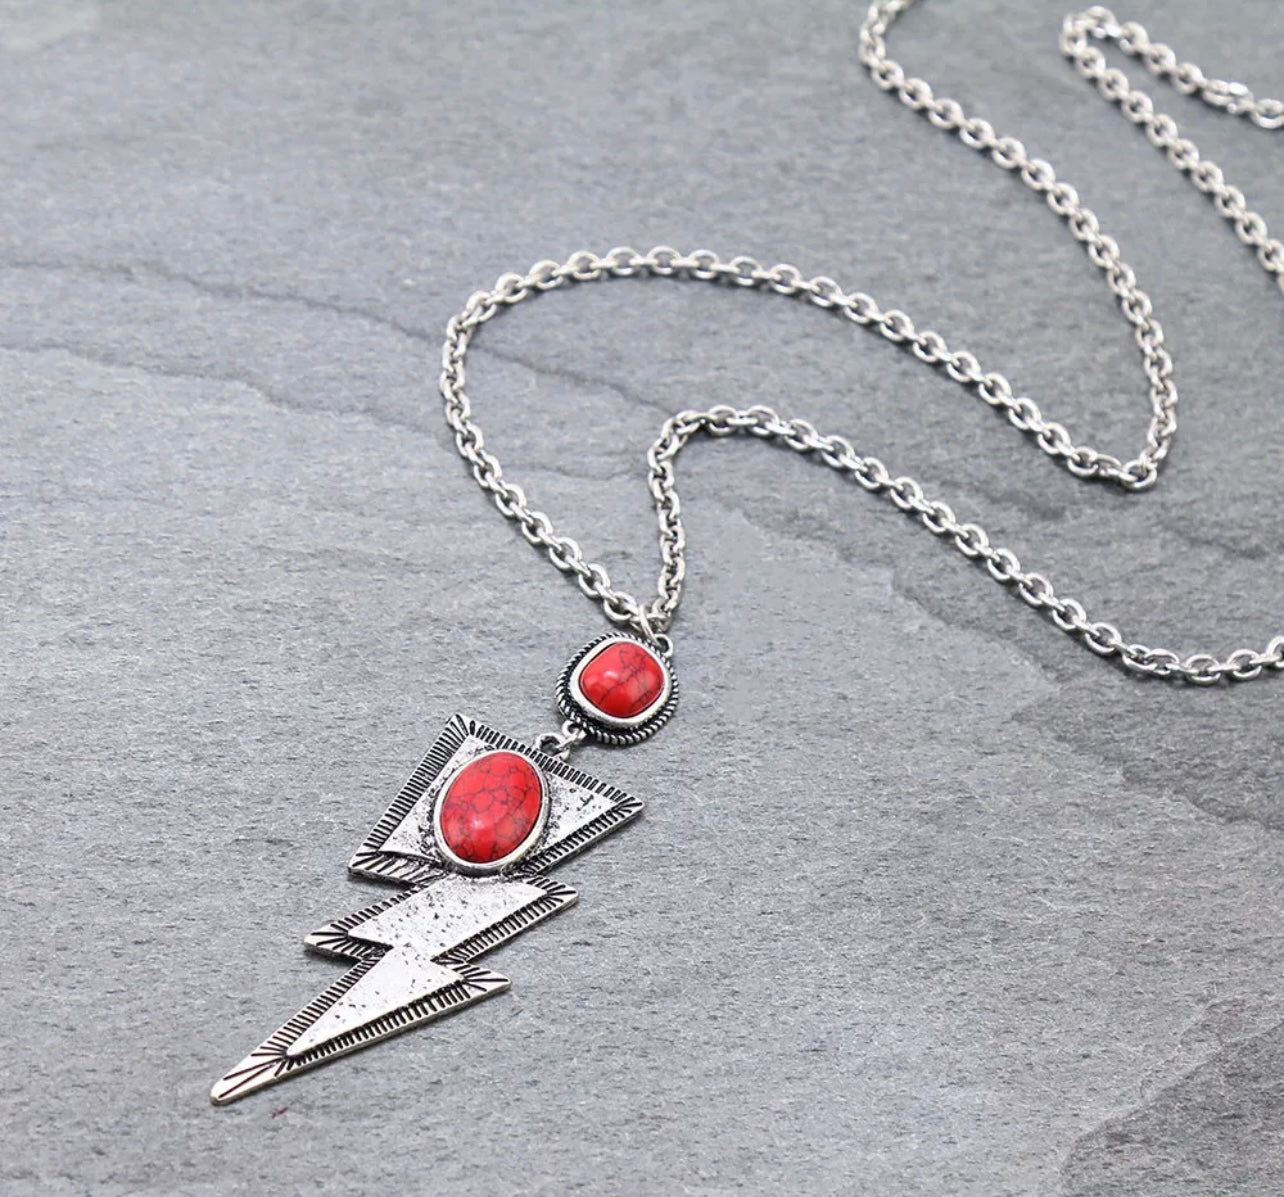 Ride the Lightning Necklace